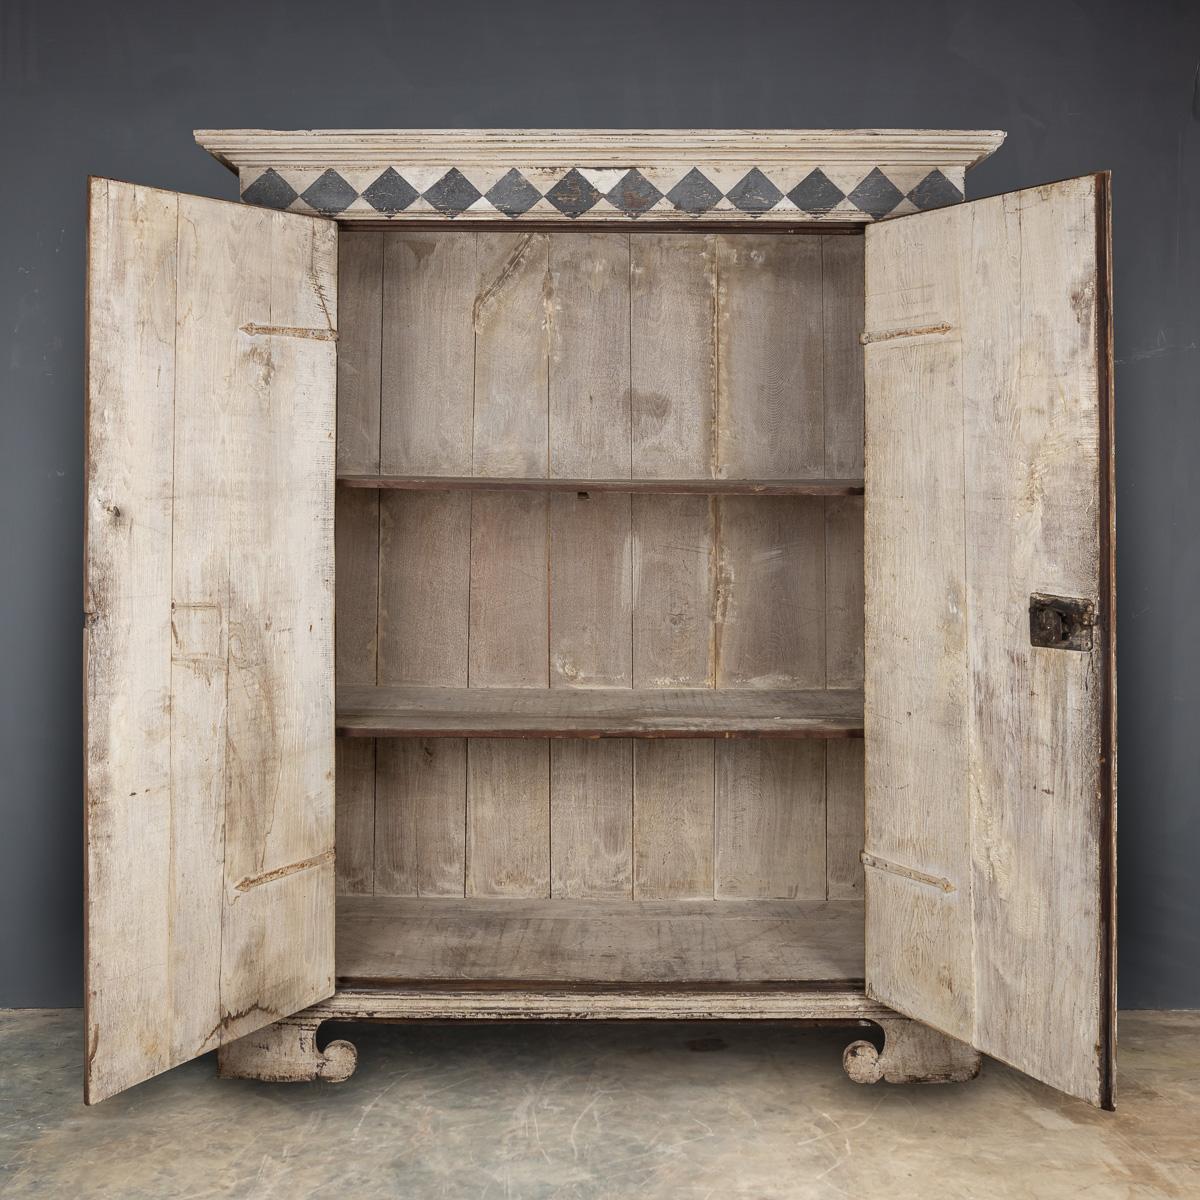 Antique 19th Century Italian Hand Painted Pine Armoire, C.1850 In Good Condition For Sale In Royal Tunbridge Wells, Kent